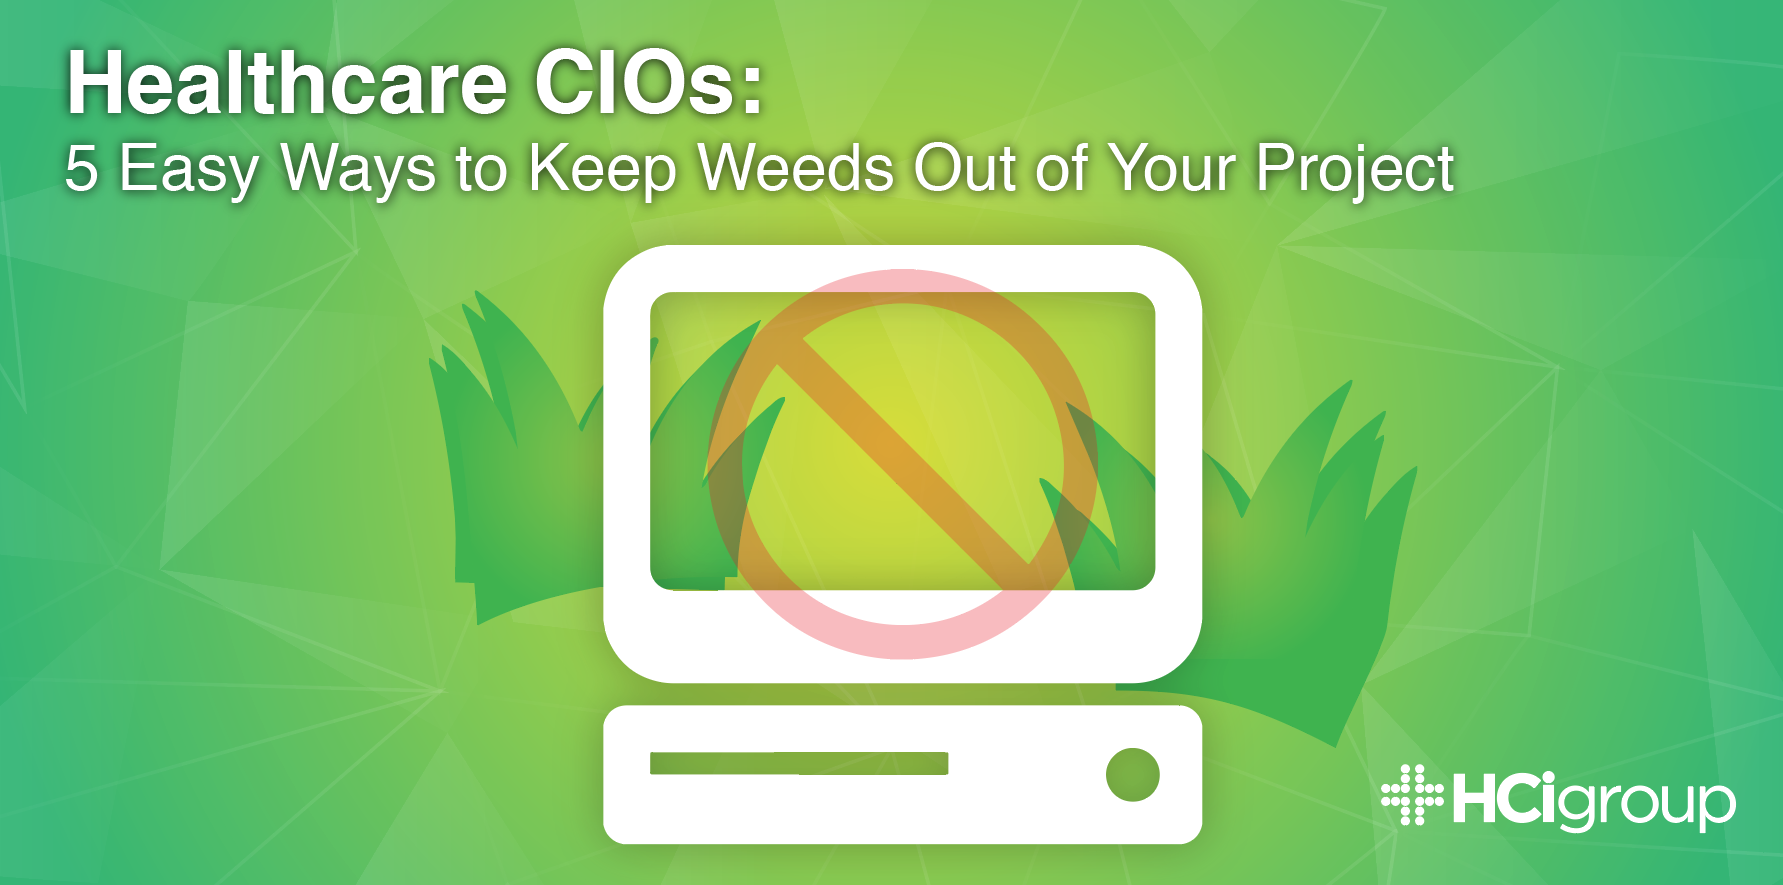 Healthcare CIOs: 5 Easy Ways to Keep Weeds Out of Your Projects